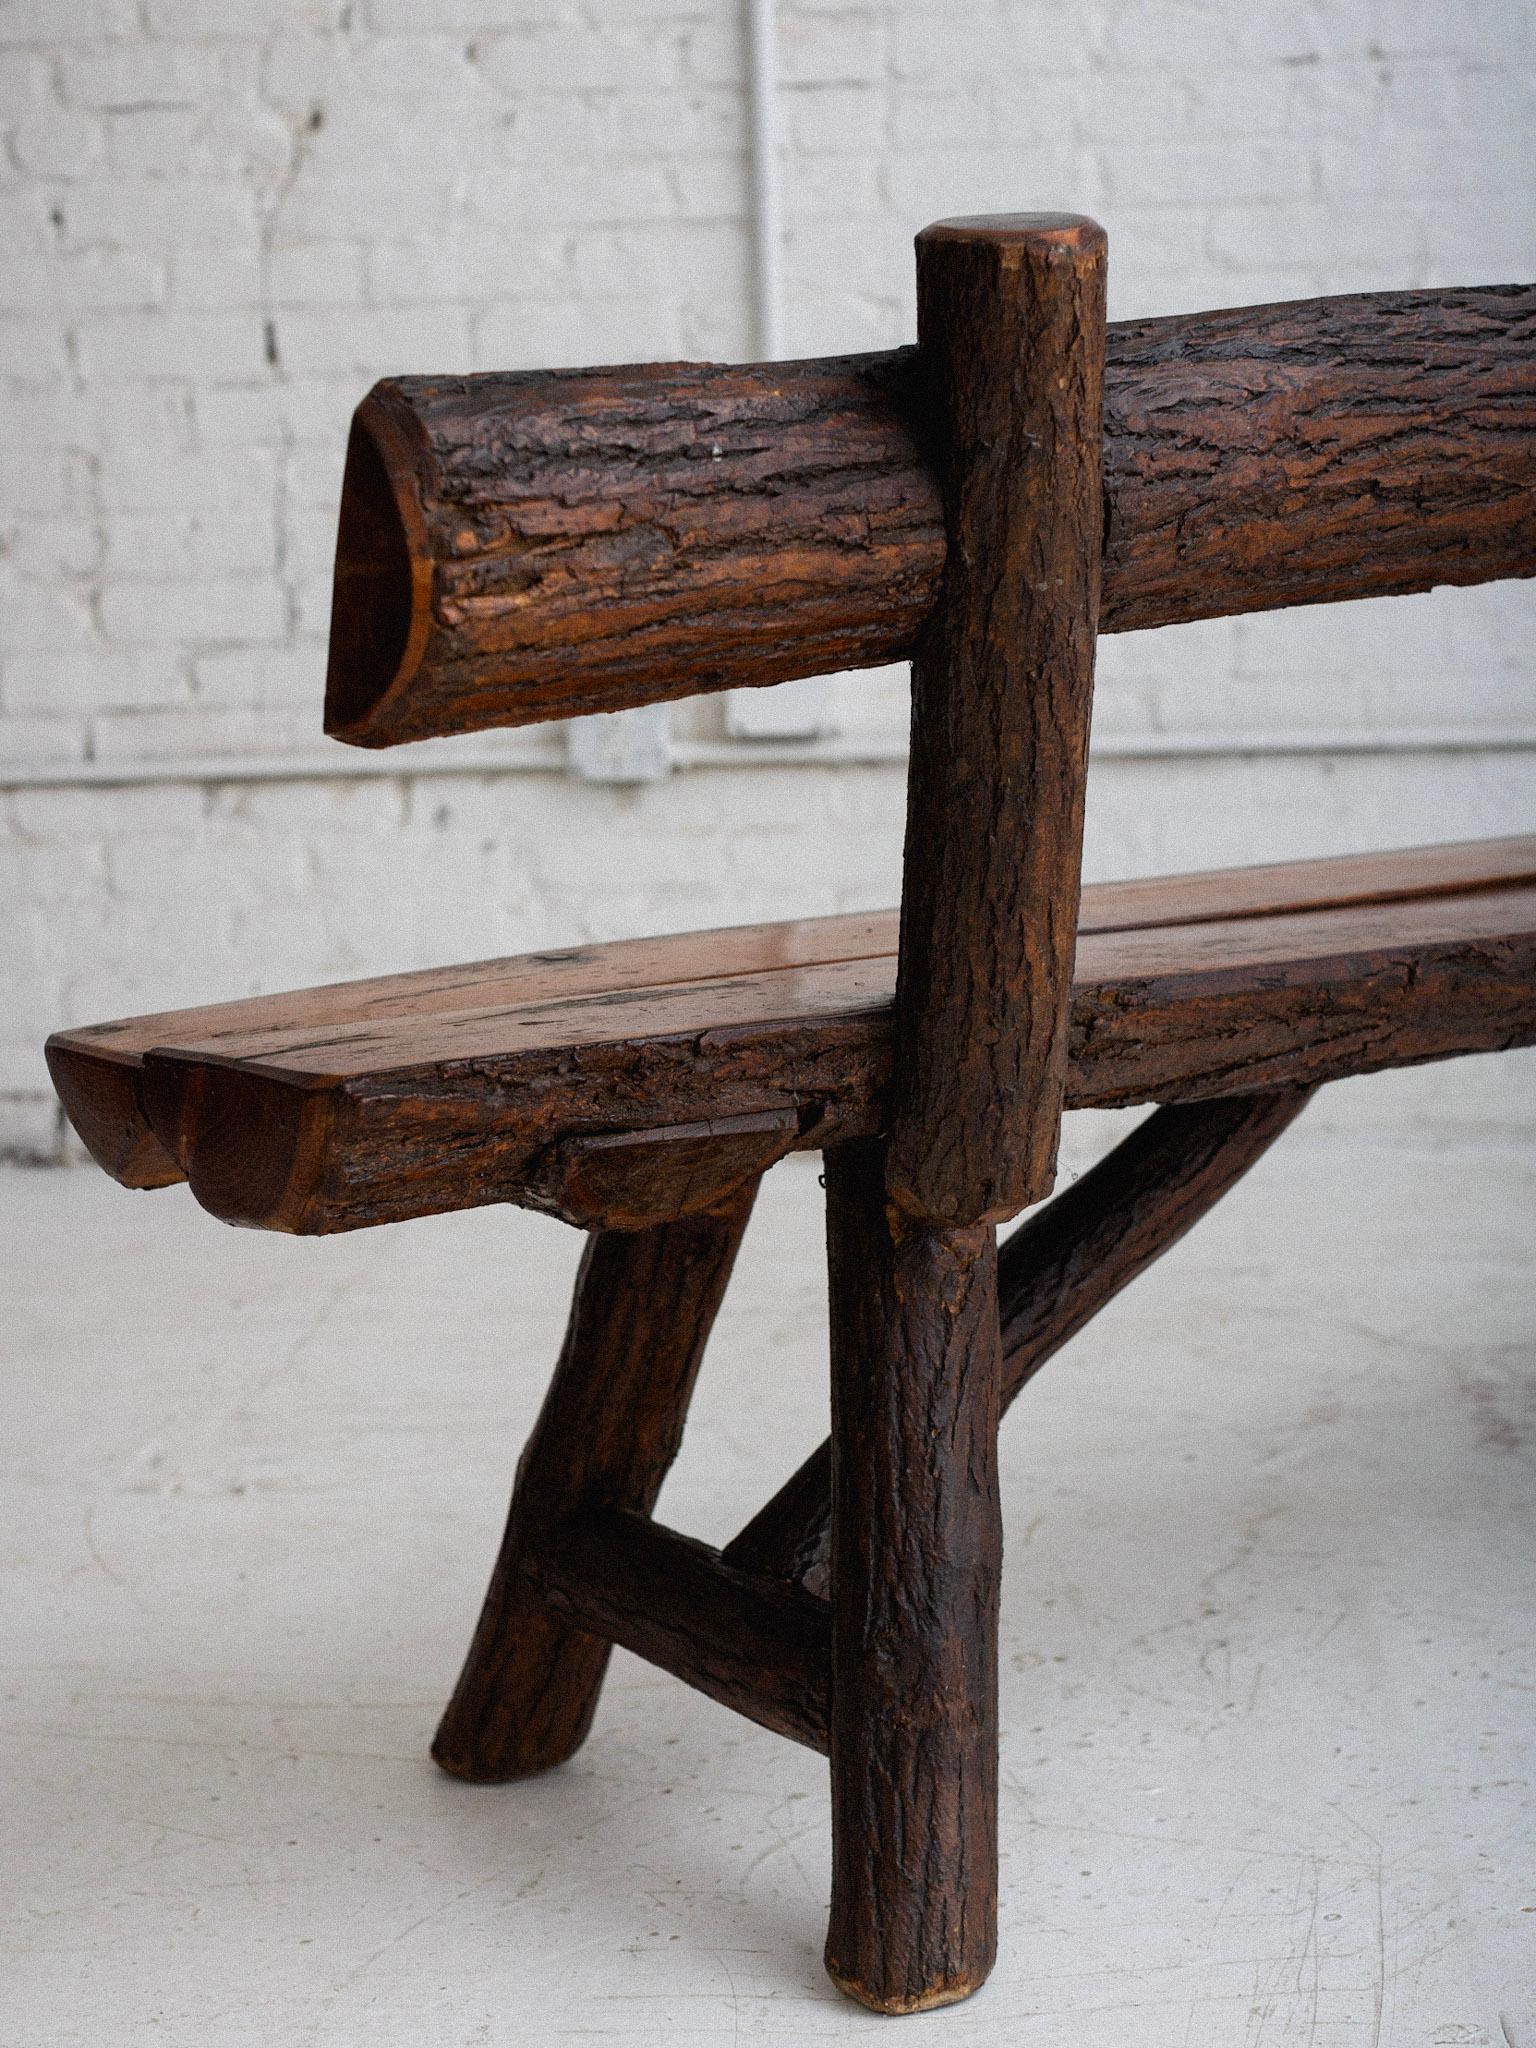 Rustic Live Edge Studio Made European Wood Bench In Good Condition For Sale In Brooklyn, NY